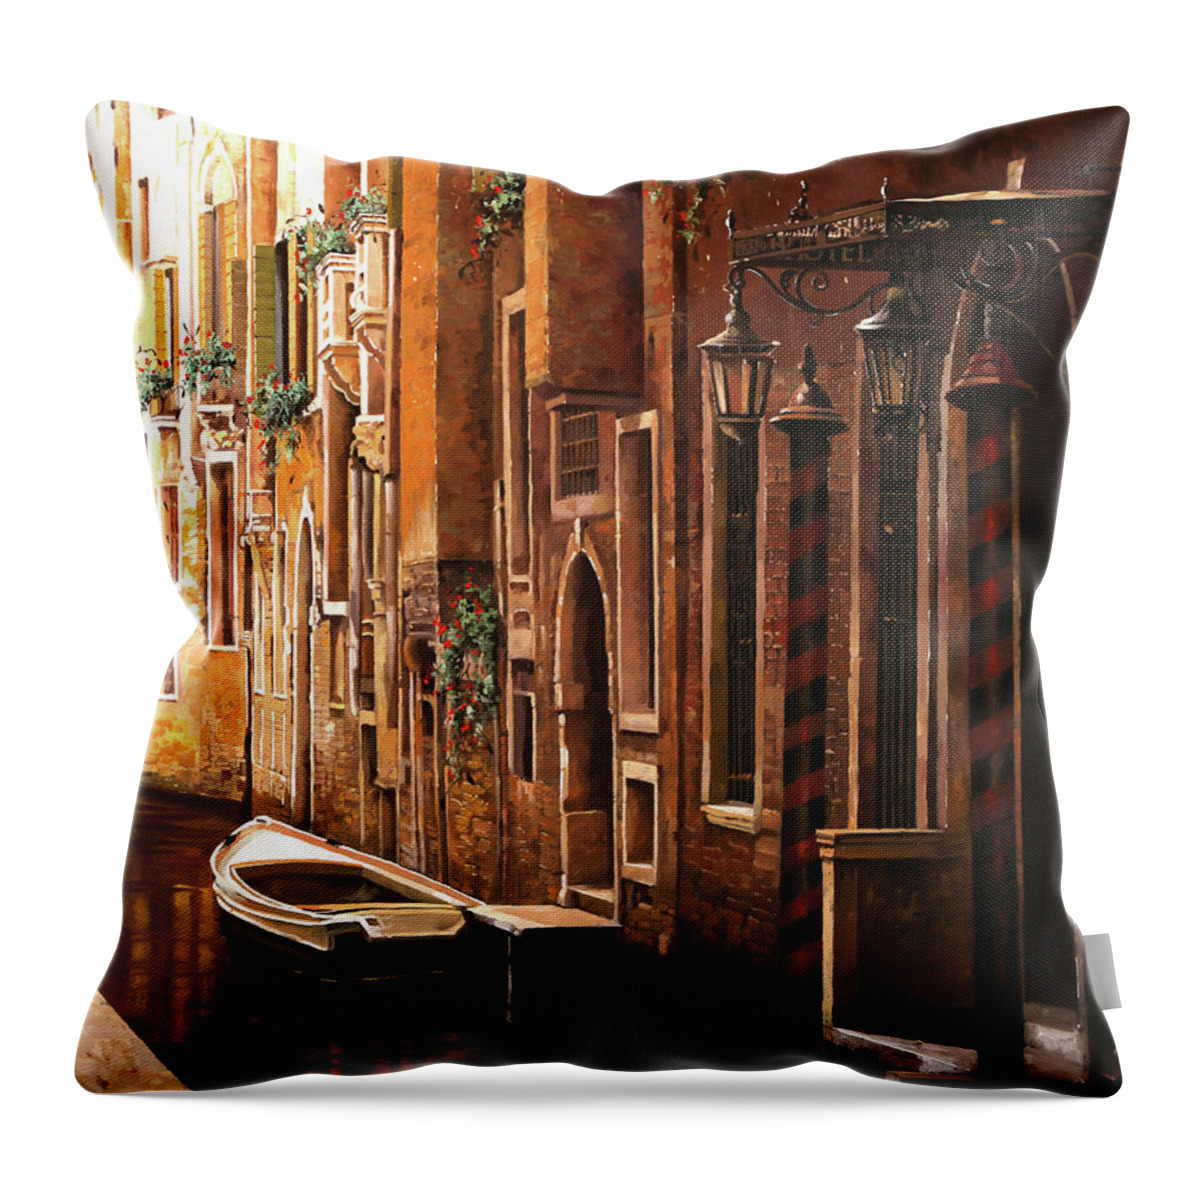 Venice Throw Pillow featuring the painting Crema Veneziana by Guido Borelli